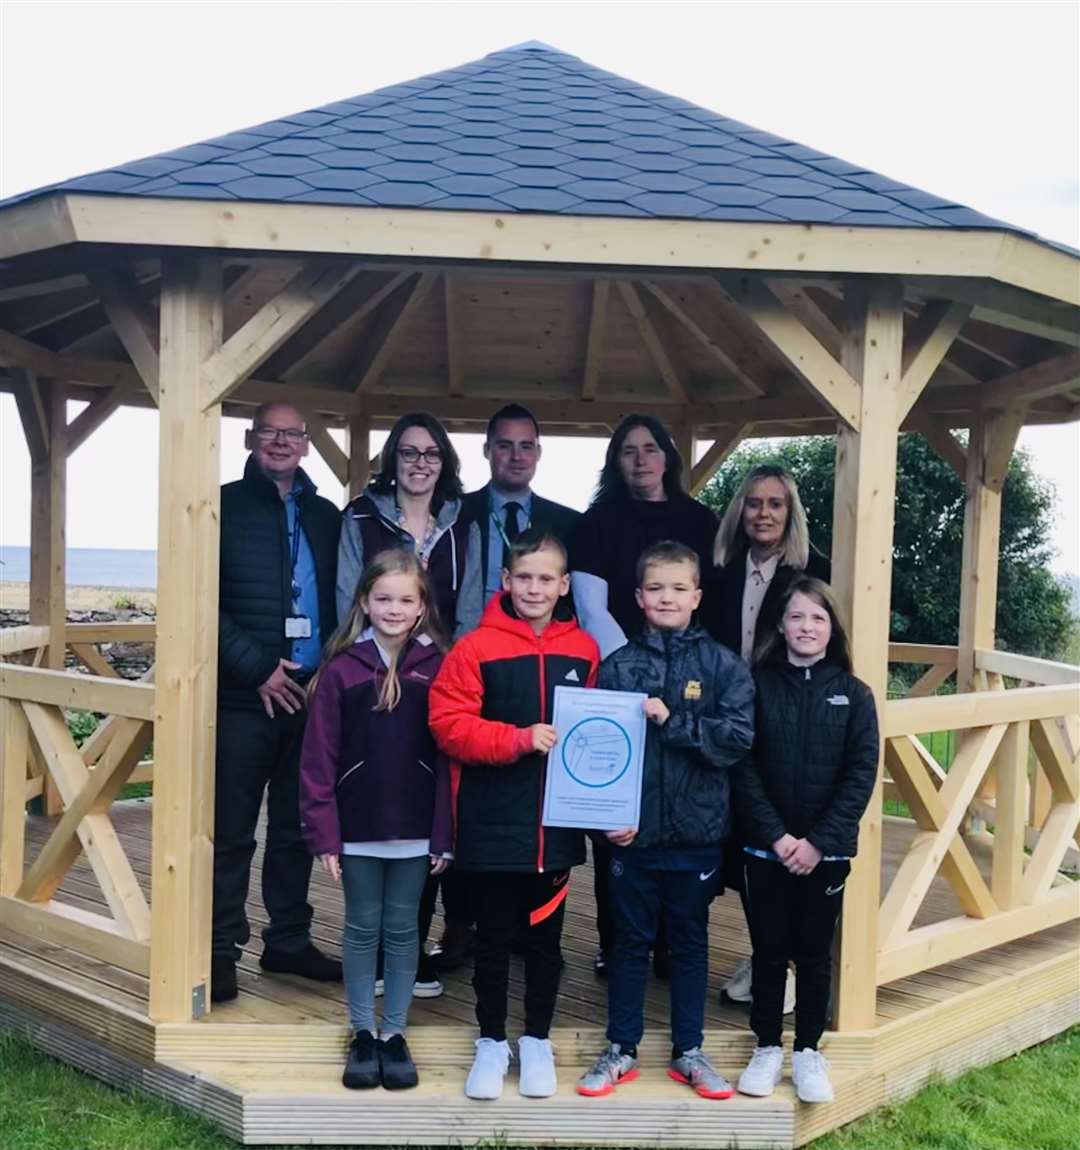 Left to right: David Shearer of SSE Renewables, class teacher Olivia Bremner, Fraser Thomson, head teacher, Treasa Hamilton, secretary, of the parent council, and class teacher Gillian Munro with house captains Paige Ronaldson, Charlie Breeze, Rory Green and Ella Mackenzie.